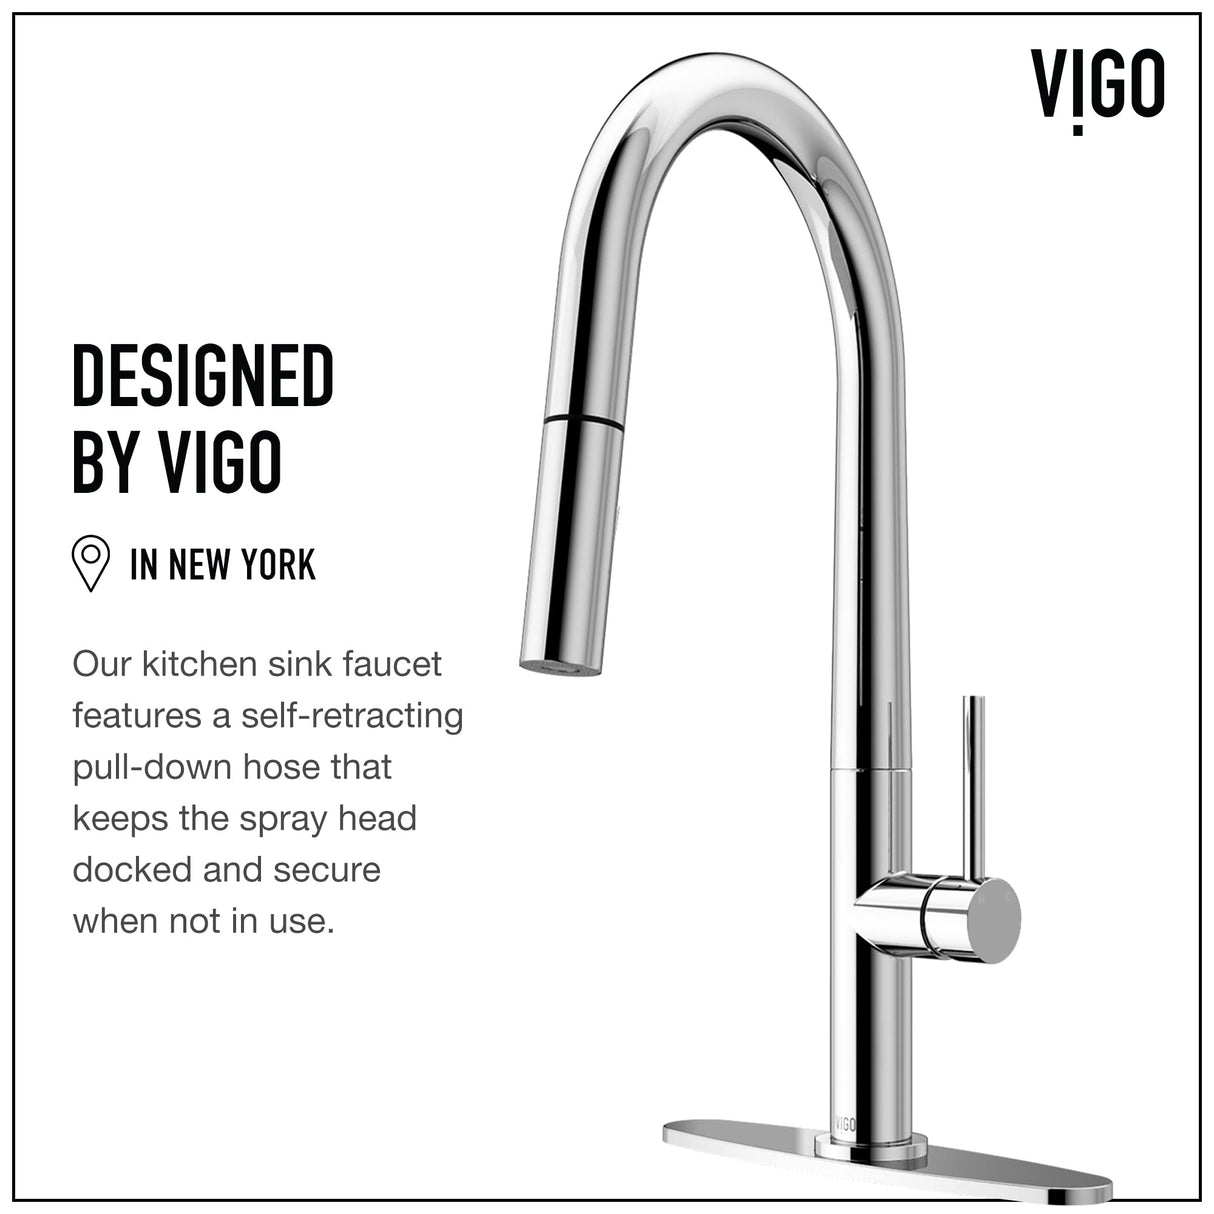 VIGO VG02029CHK1 18" H Greenwich Single-Handle with Pull-Down Sprayer Kitchen Faucet with Deck Plate in Chrome